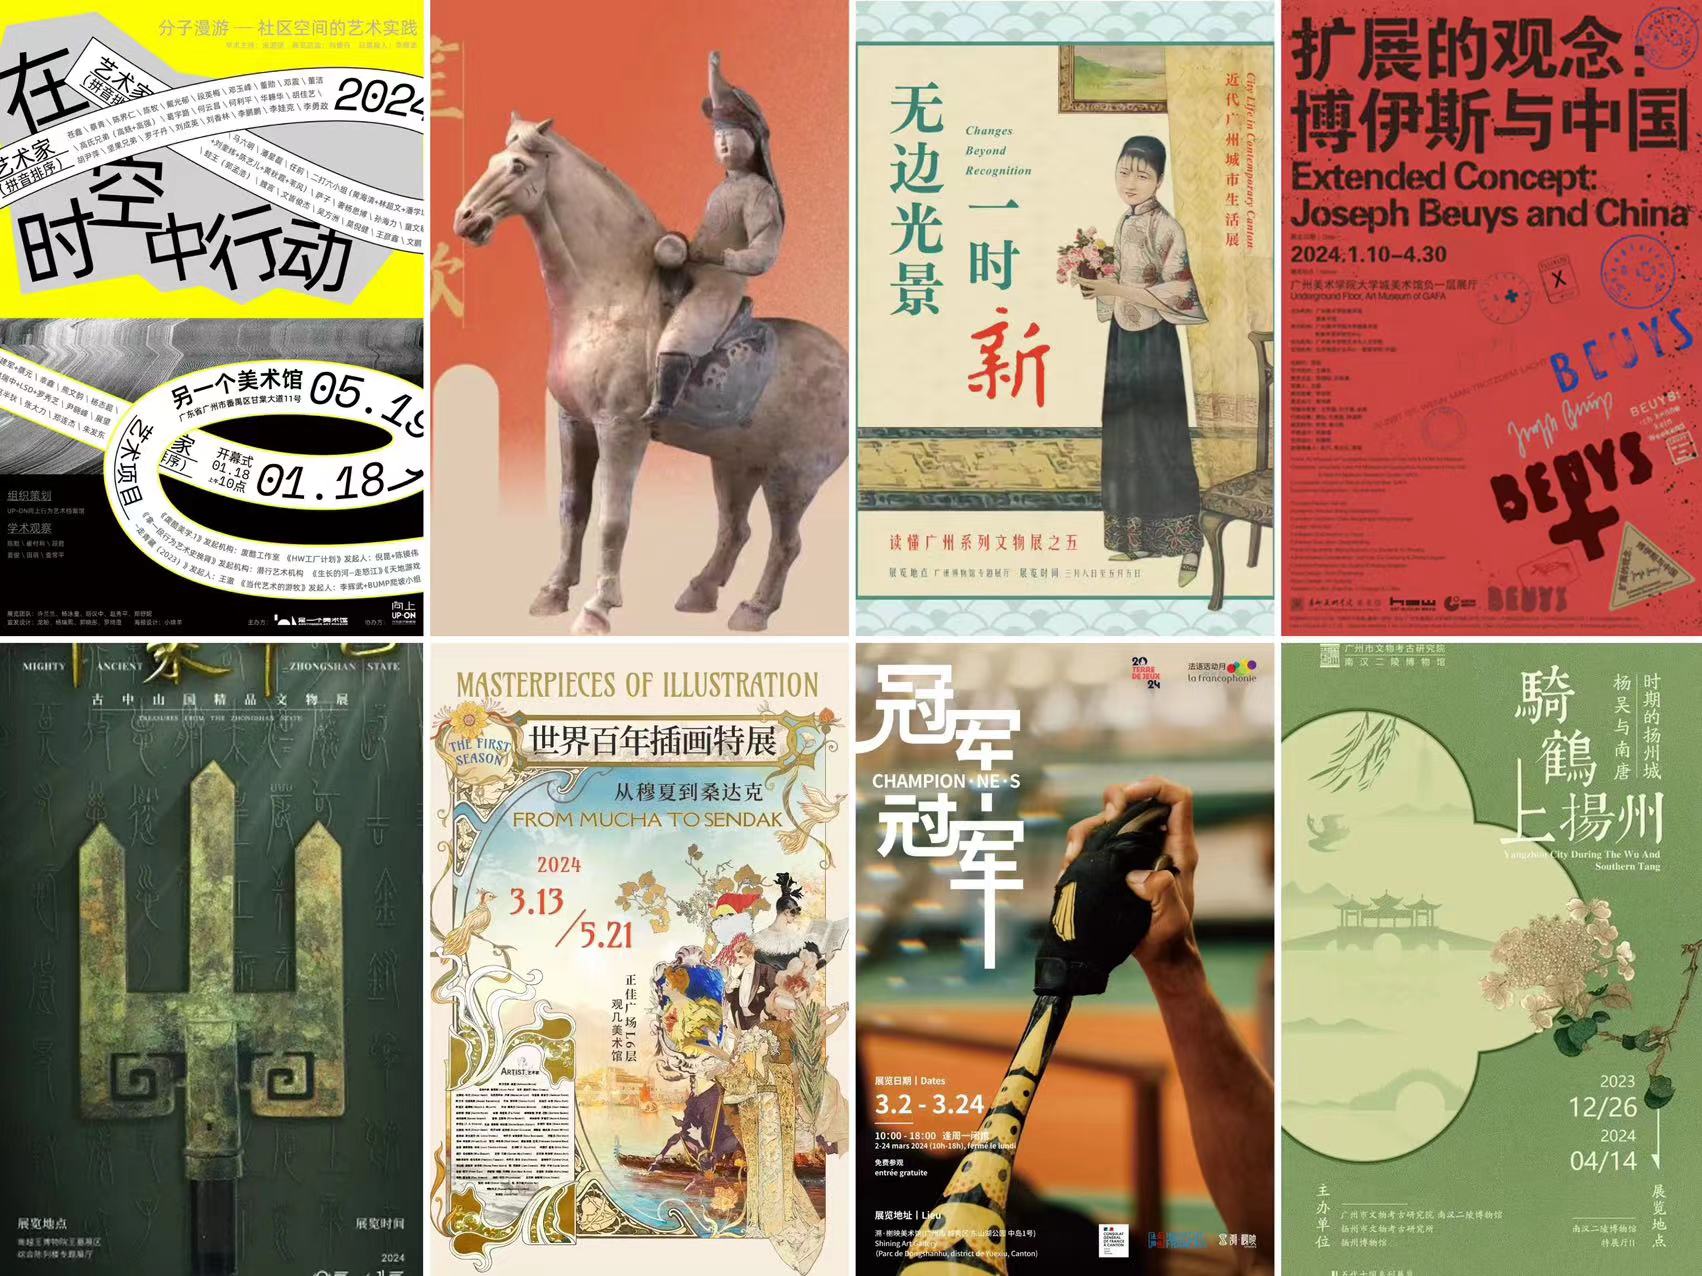 28 Unheard of Work Shows This March in Guangzhou